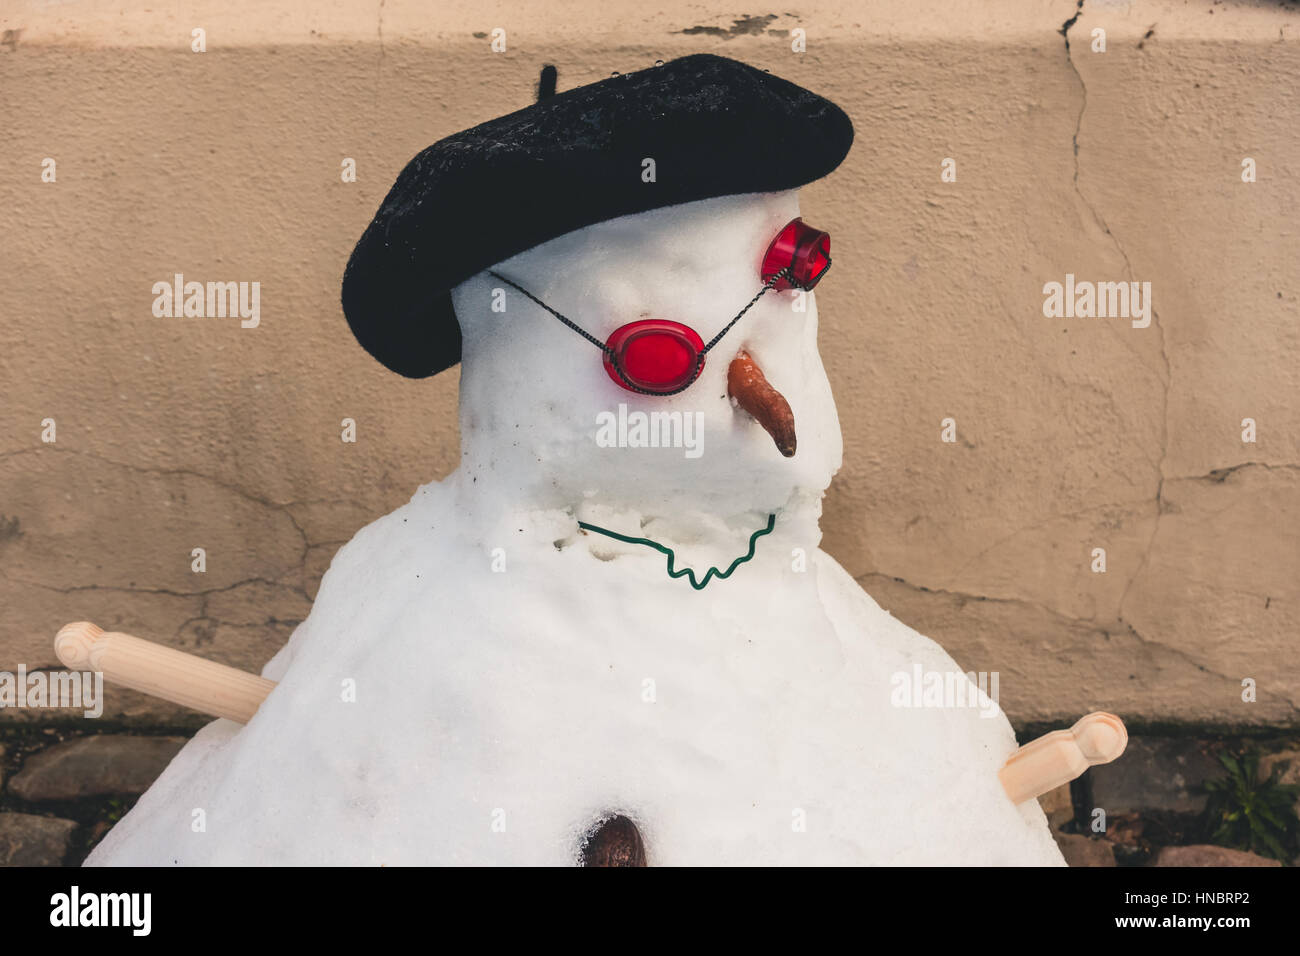 Funny snowman in winter Stock Photo